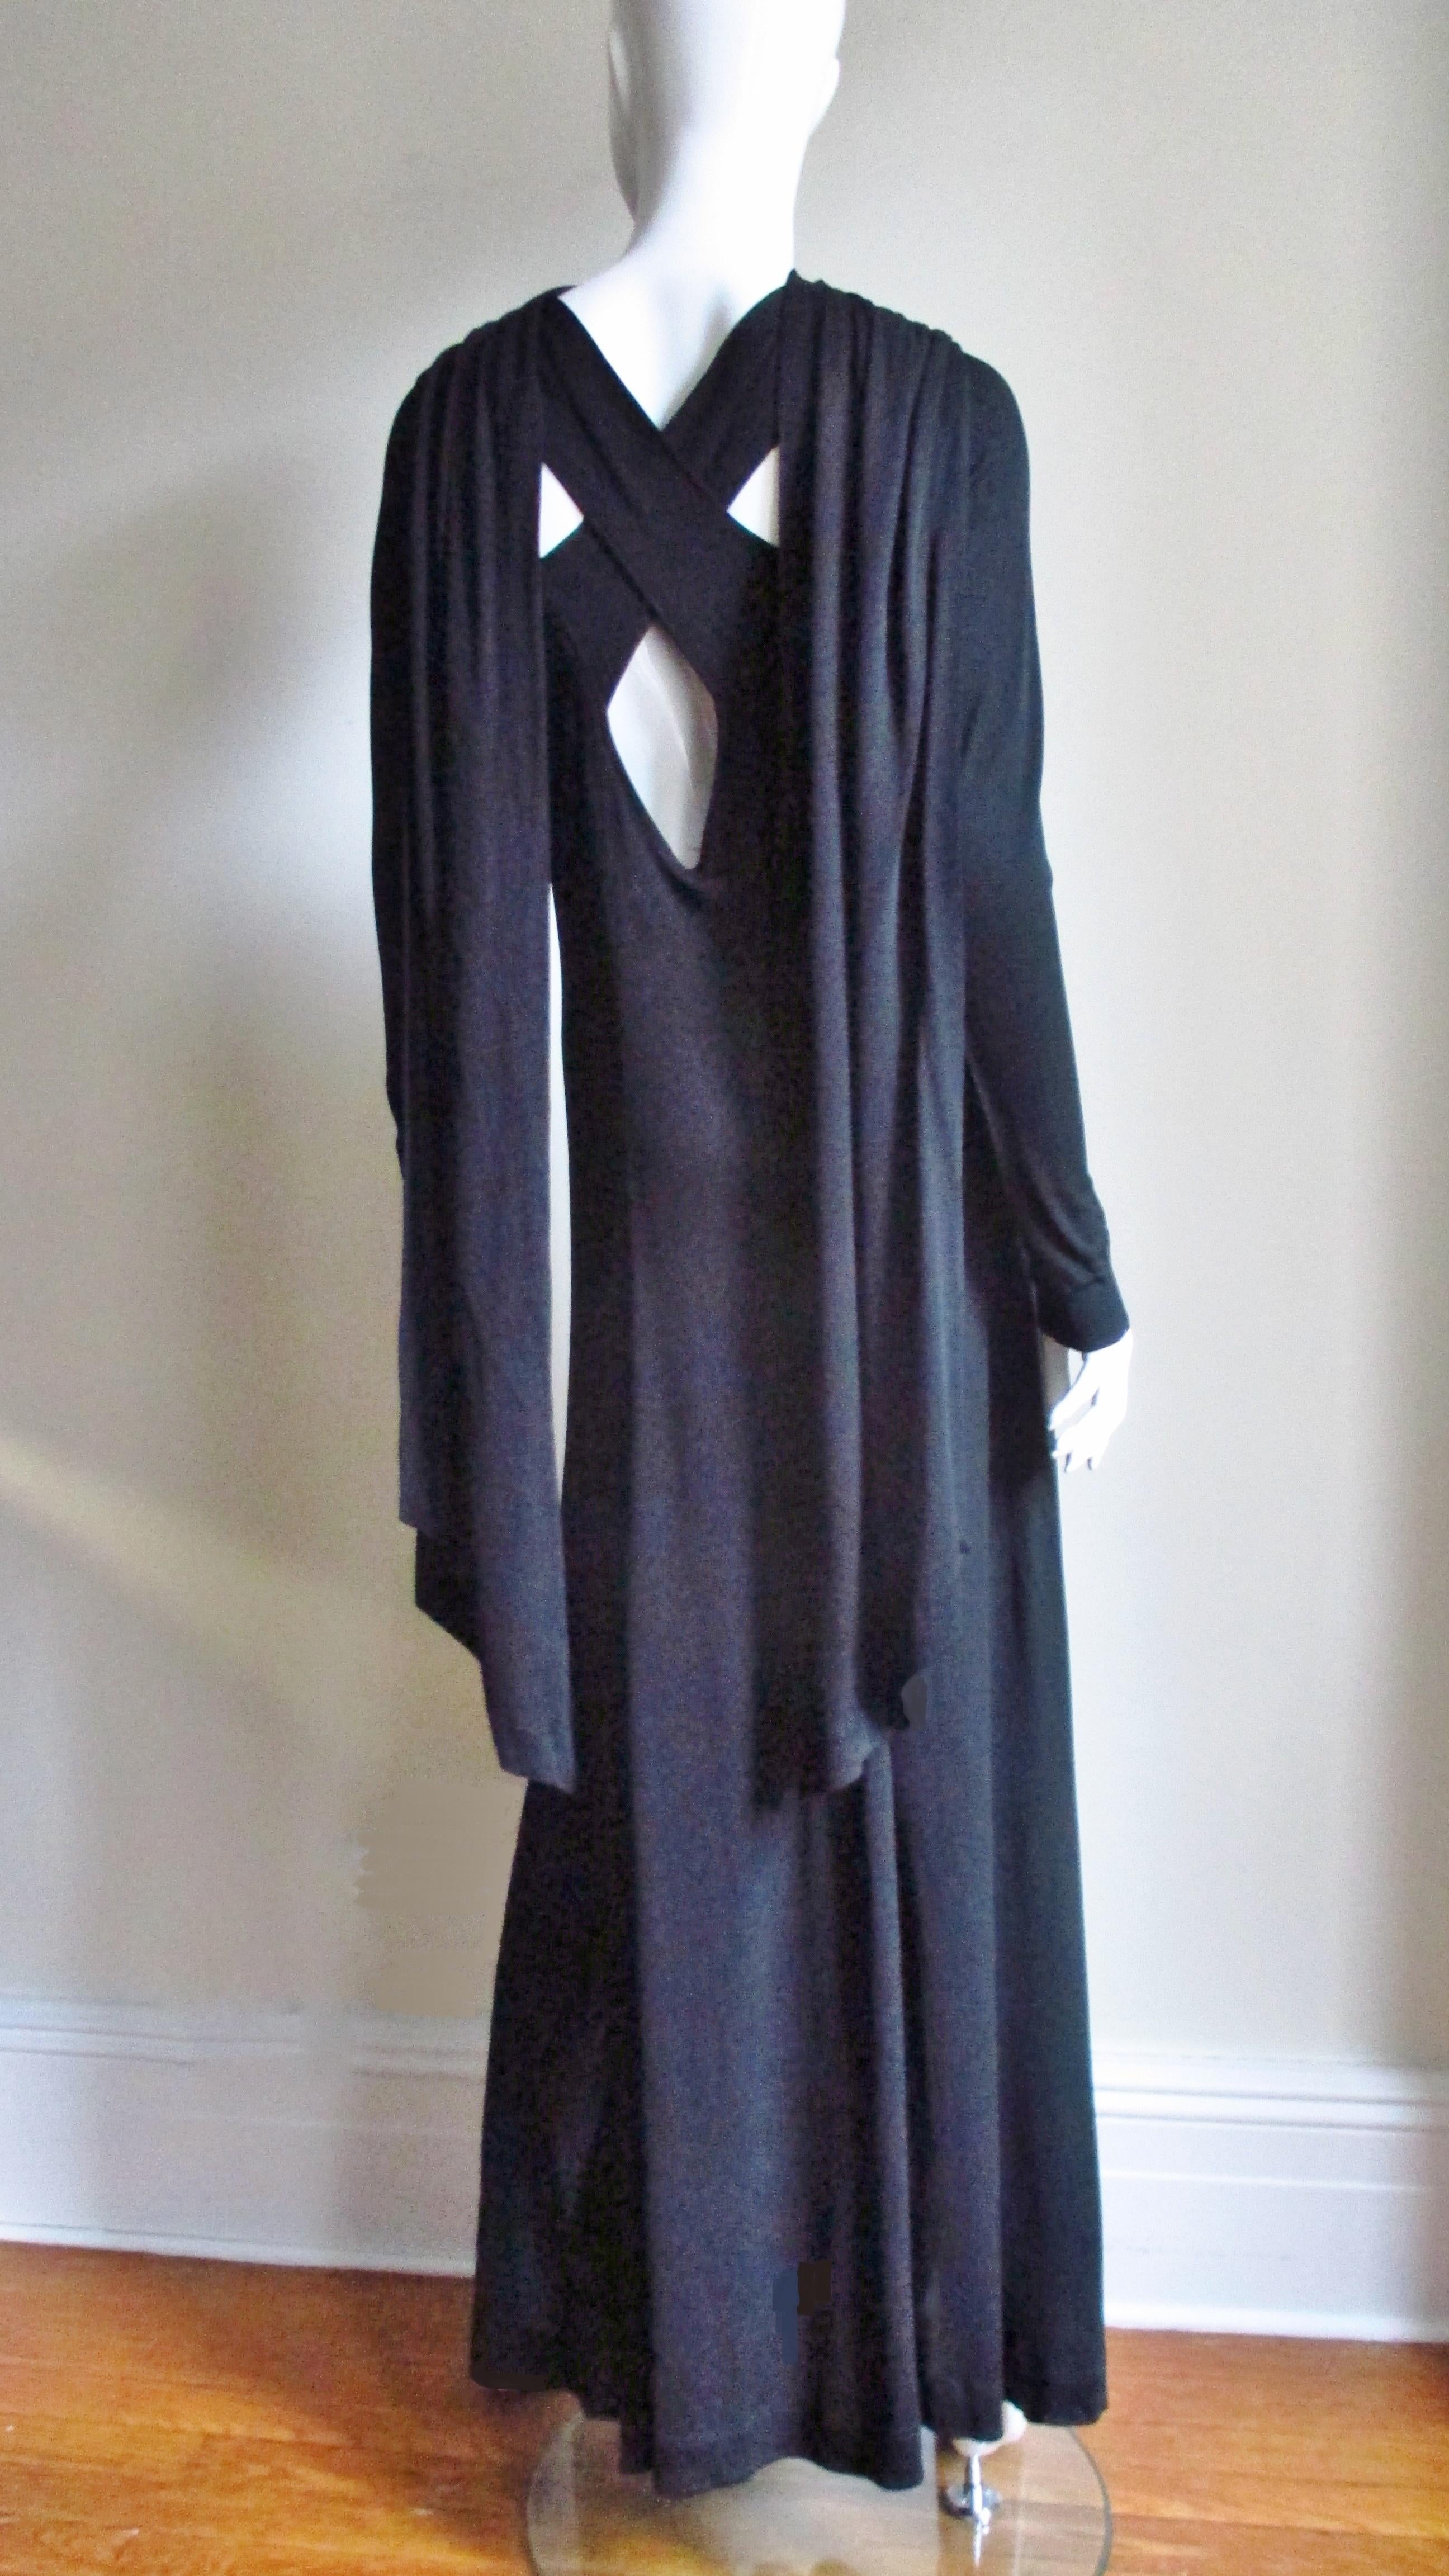 A fabulous black jersey full length dress gown from legendary British designer Jean Muir. This dress has lots of detail- cut outs at the shoulders, upper and mid back with shoulder draping down each side at the back. There is seaming creating a